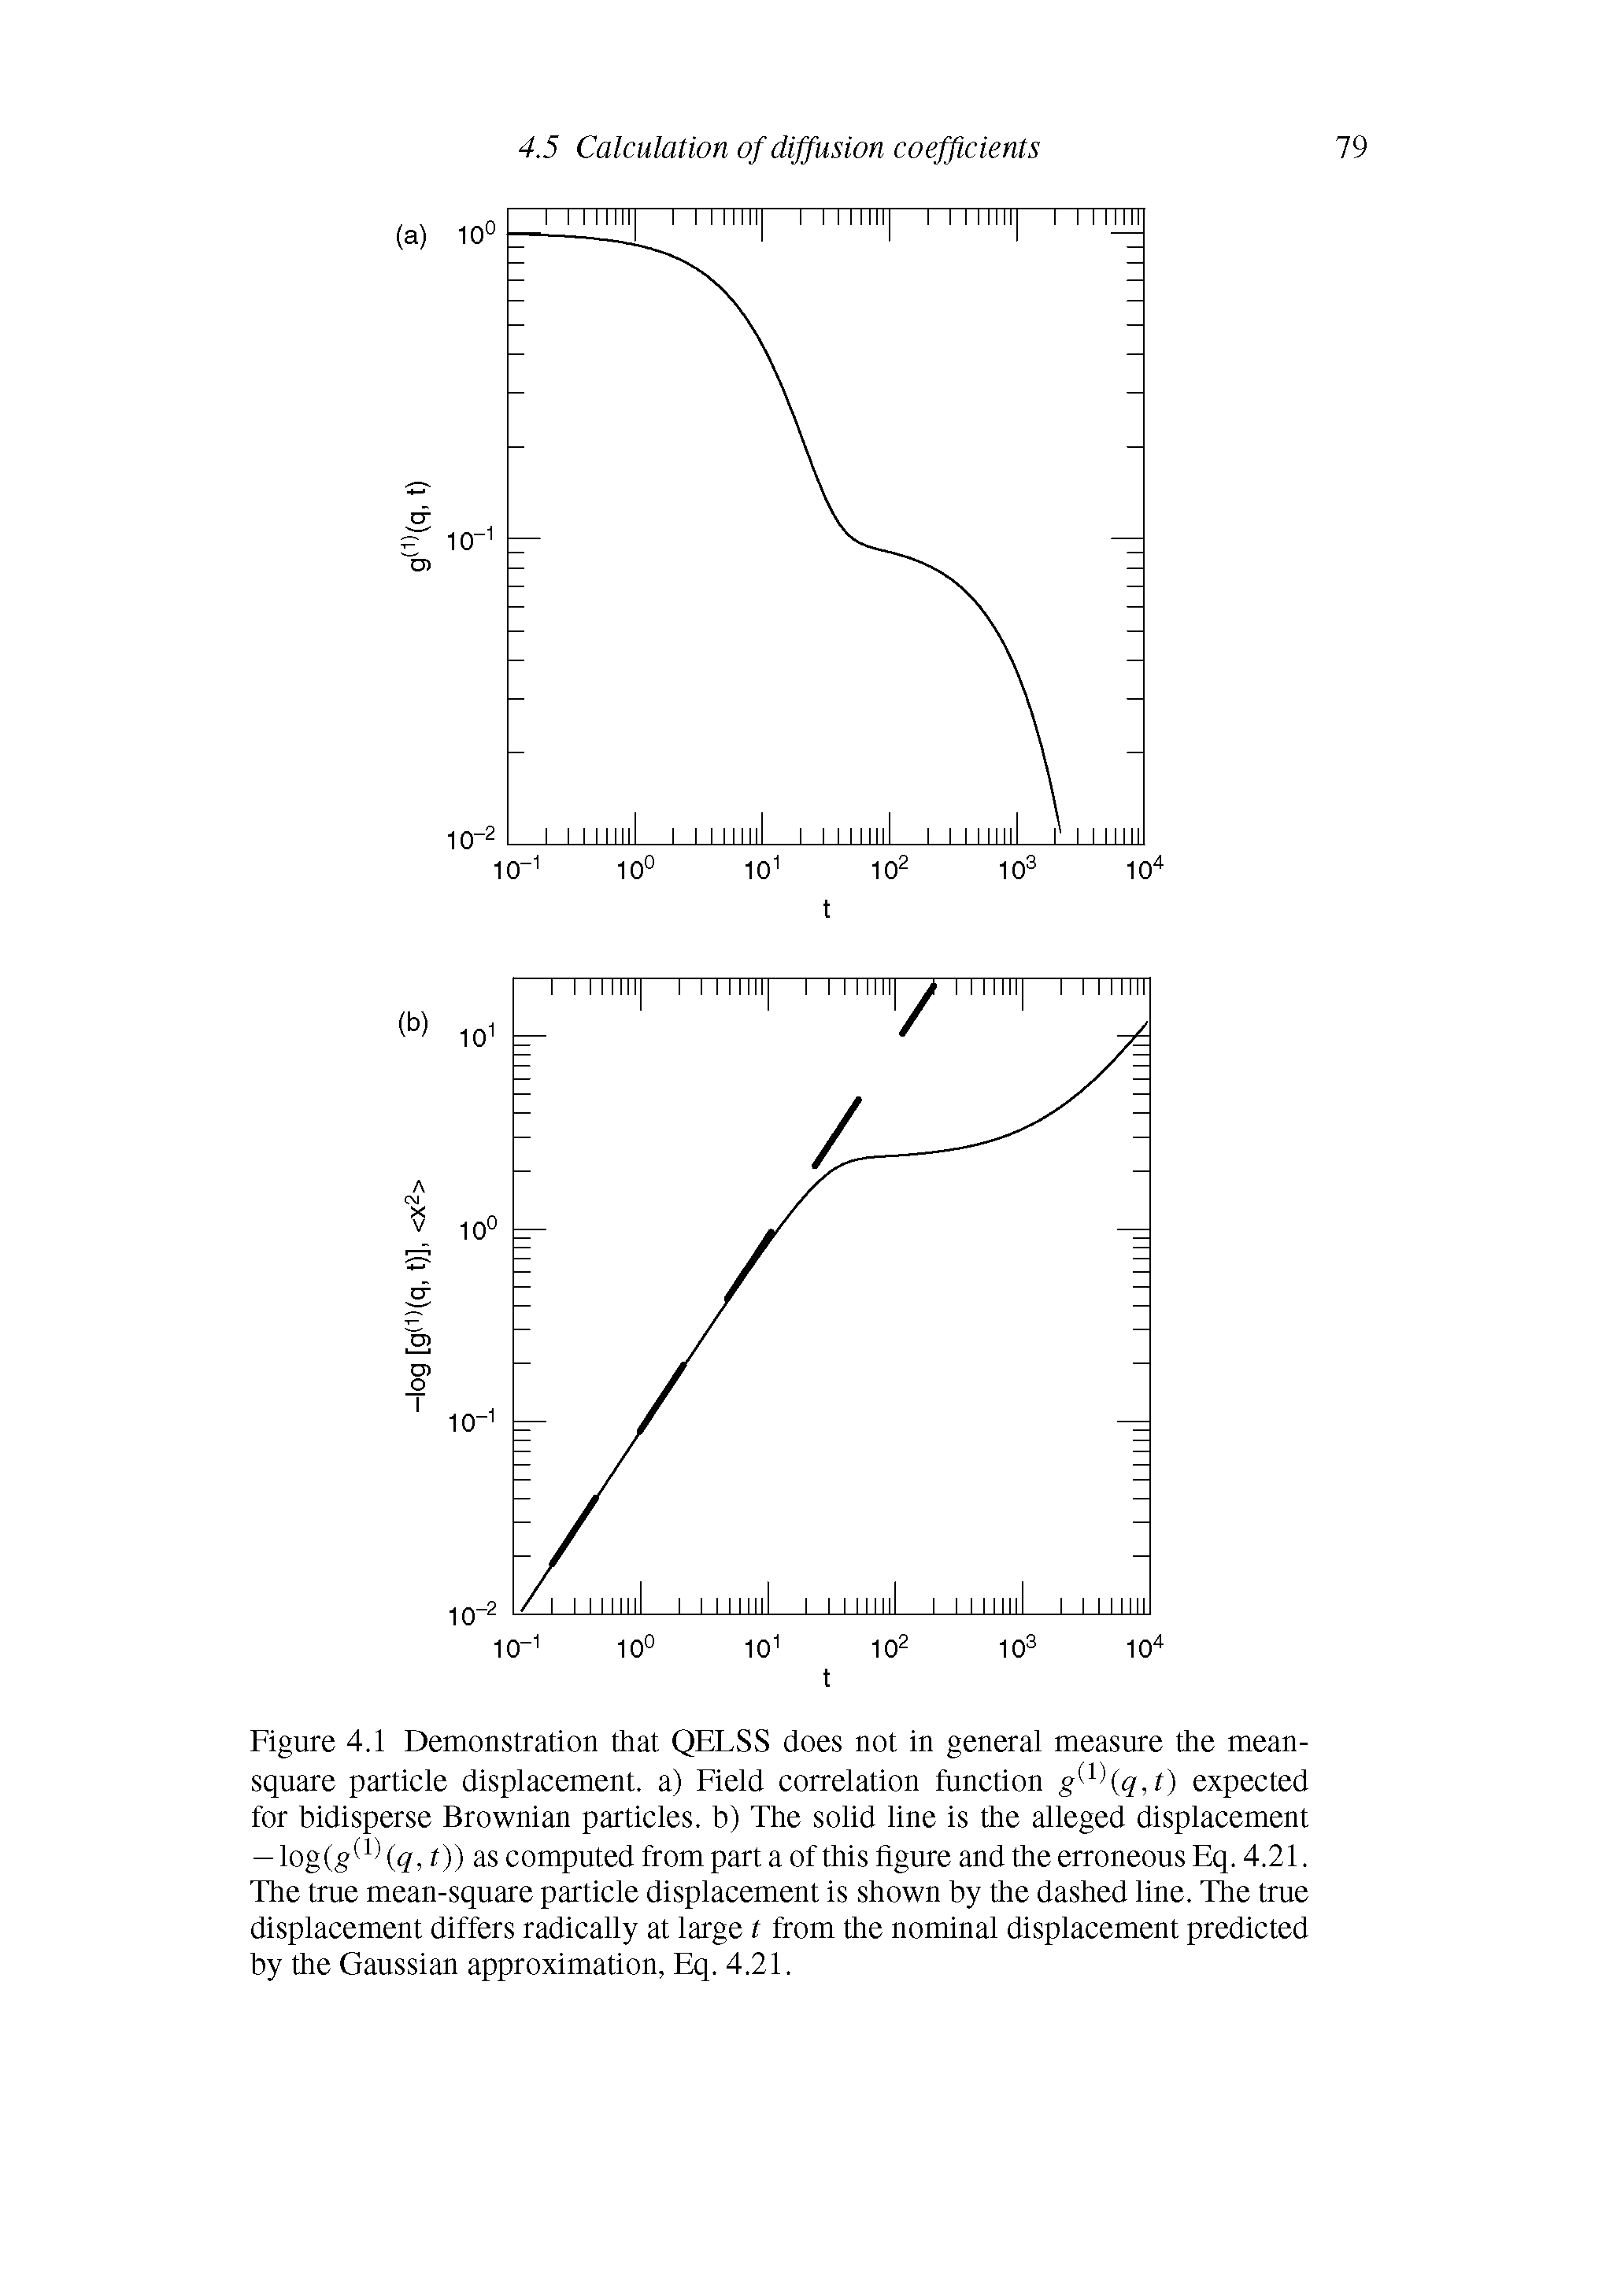 Figure 4.1 Demonstration that QELSS does not in general measure the mean-square particle displacement, a) Field correlation function g q,t) expected for bidisperse Brownian particles, b) The solid line is the alleged displacement - log(g q, t)) as computed from part a of this figure and the erroneous Eq. 4.21. The true mean-square particle displacement is shown by the dashed line. The true displacement differs radically at large t from the nominal displacement predicted by the Gaussian approximation, Eq. 4.21.